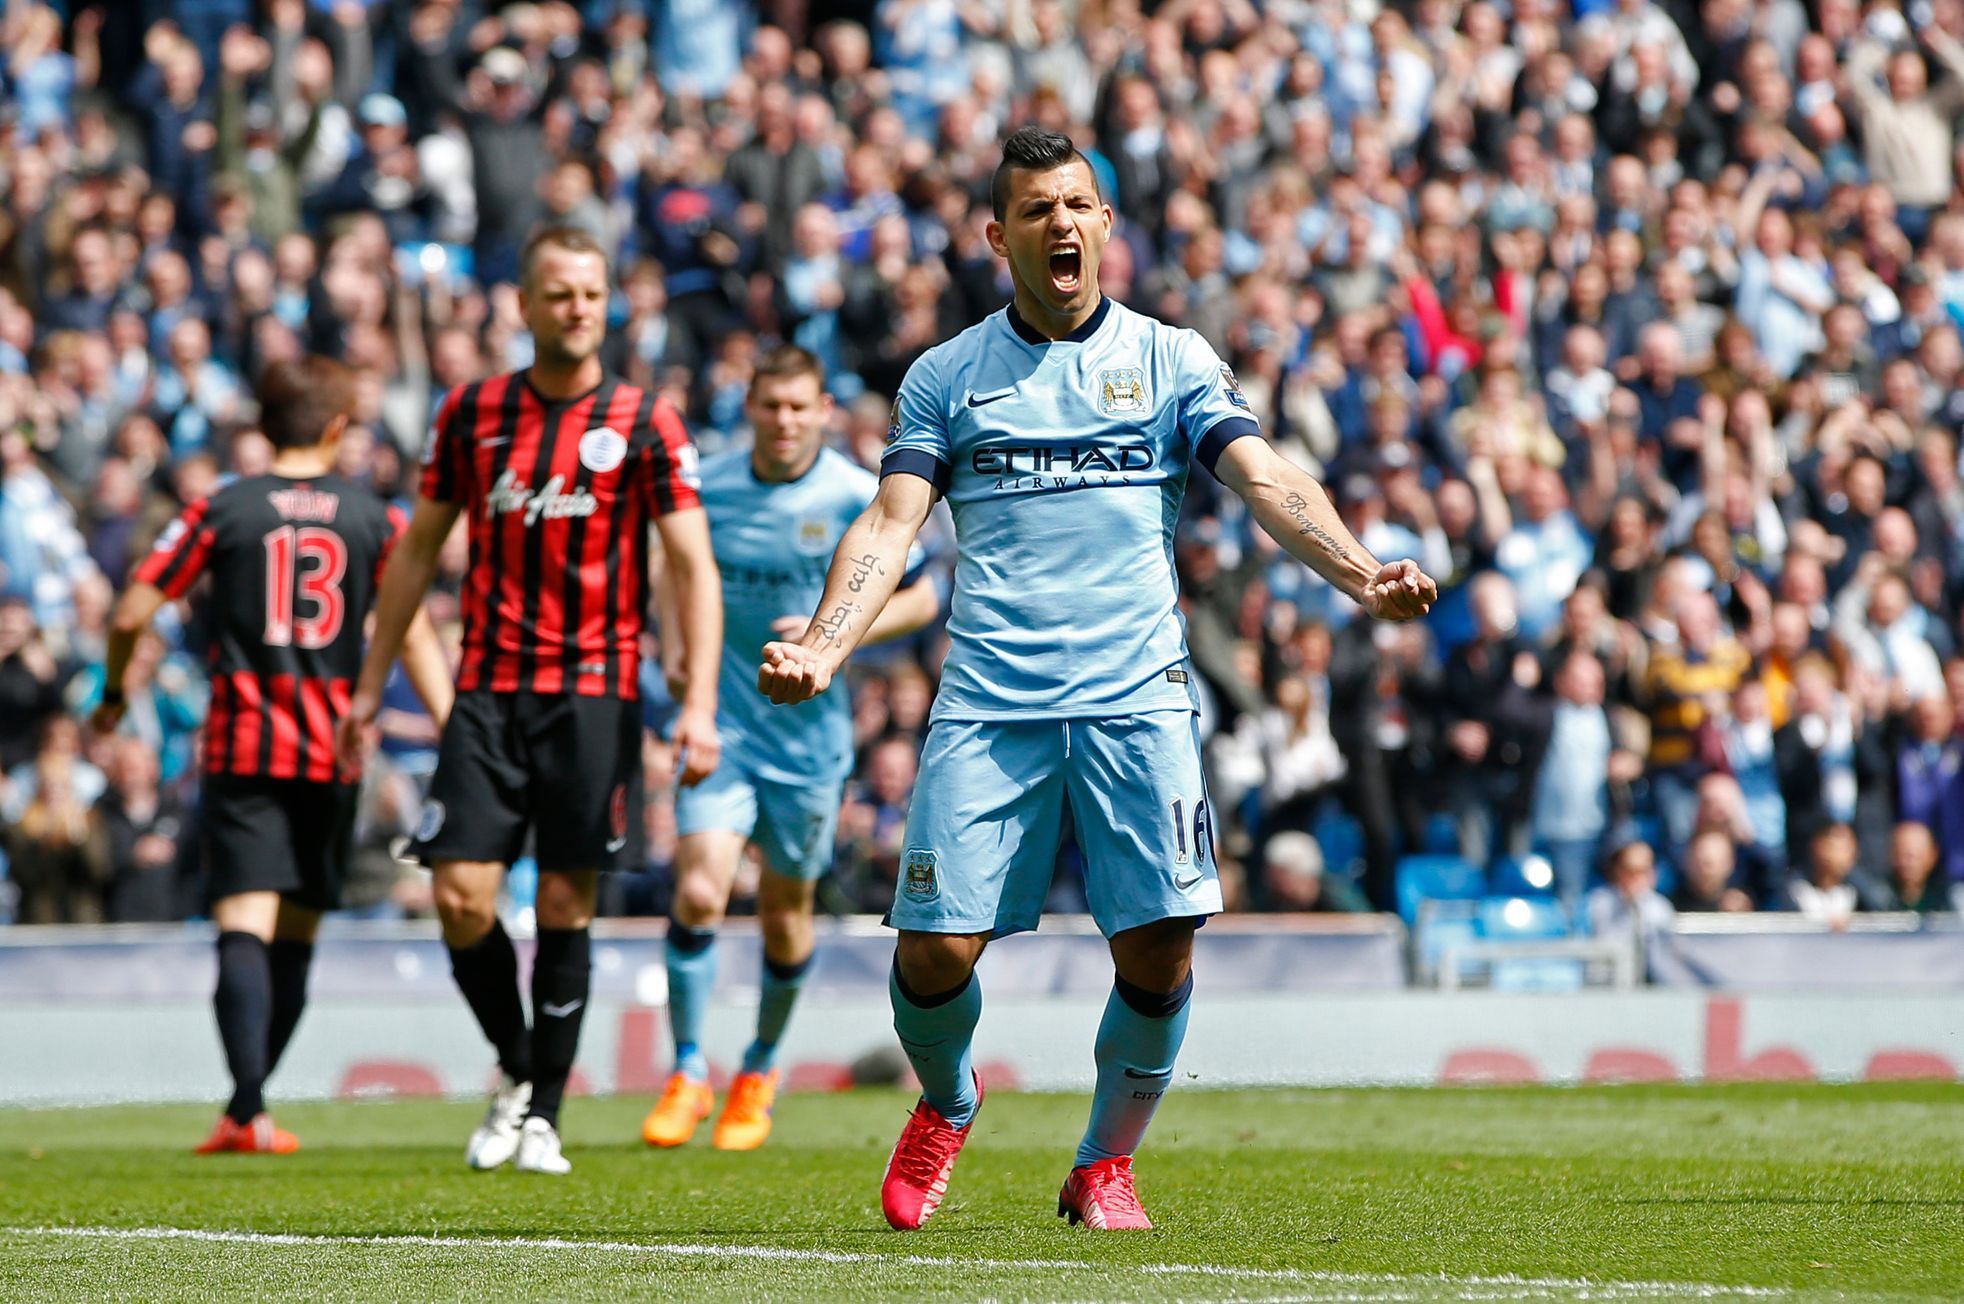 Football: Sergio Aguero celebrates after scoring the fourth goal for Manchester City and completing his hat trick